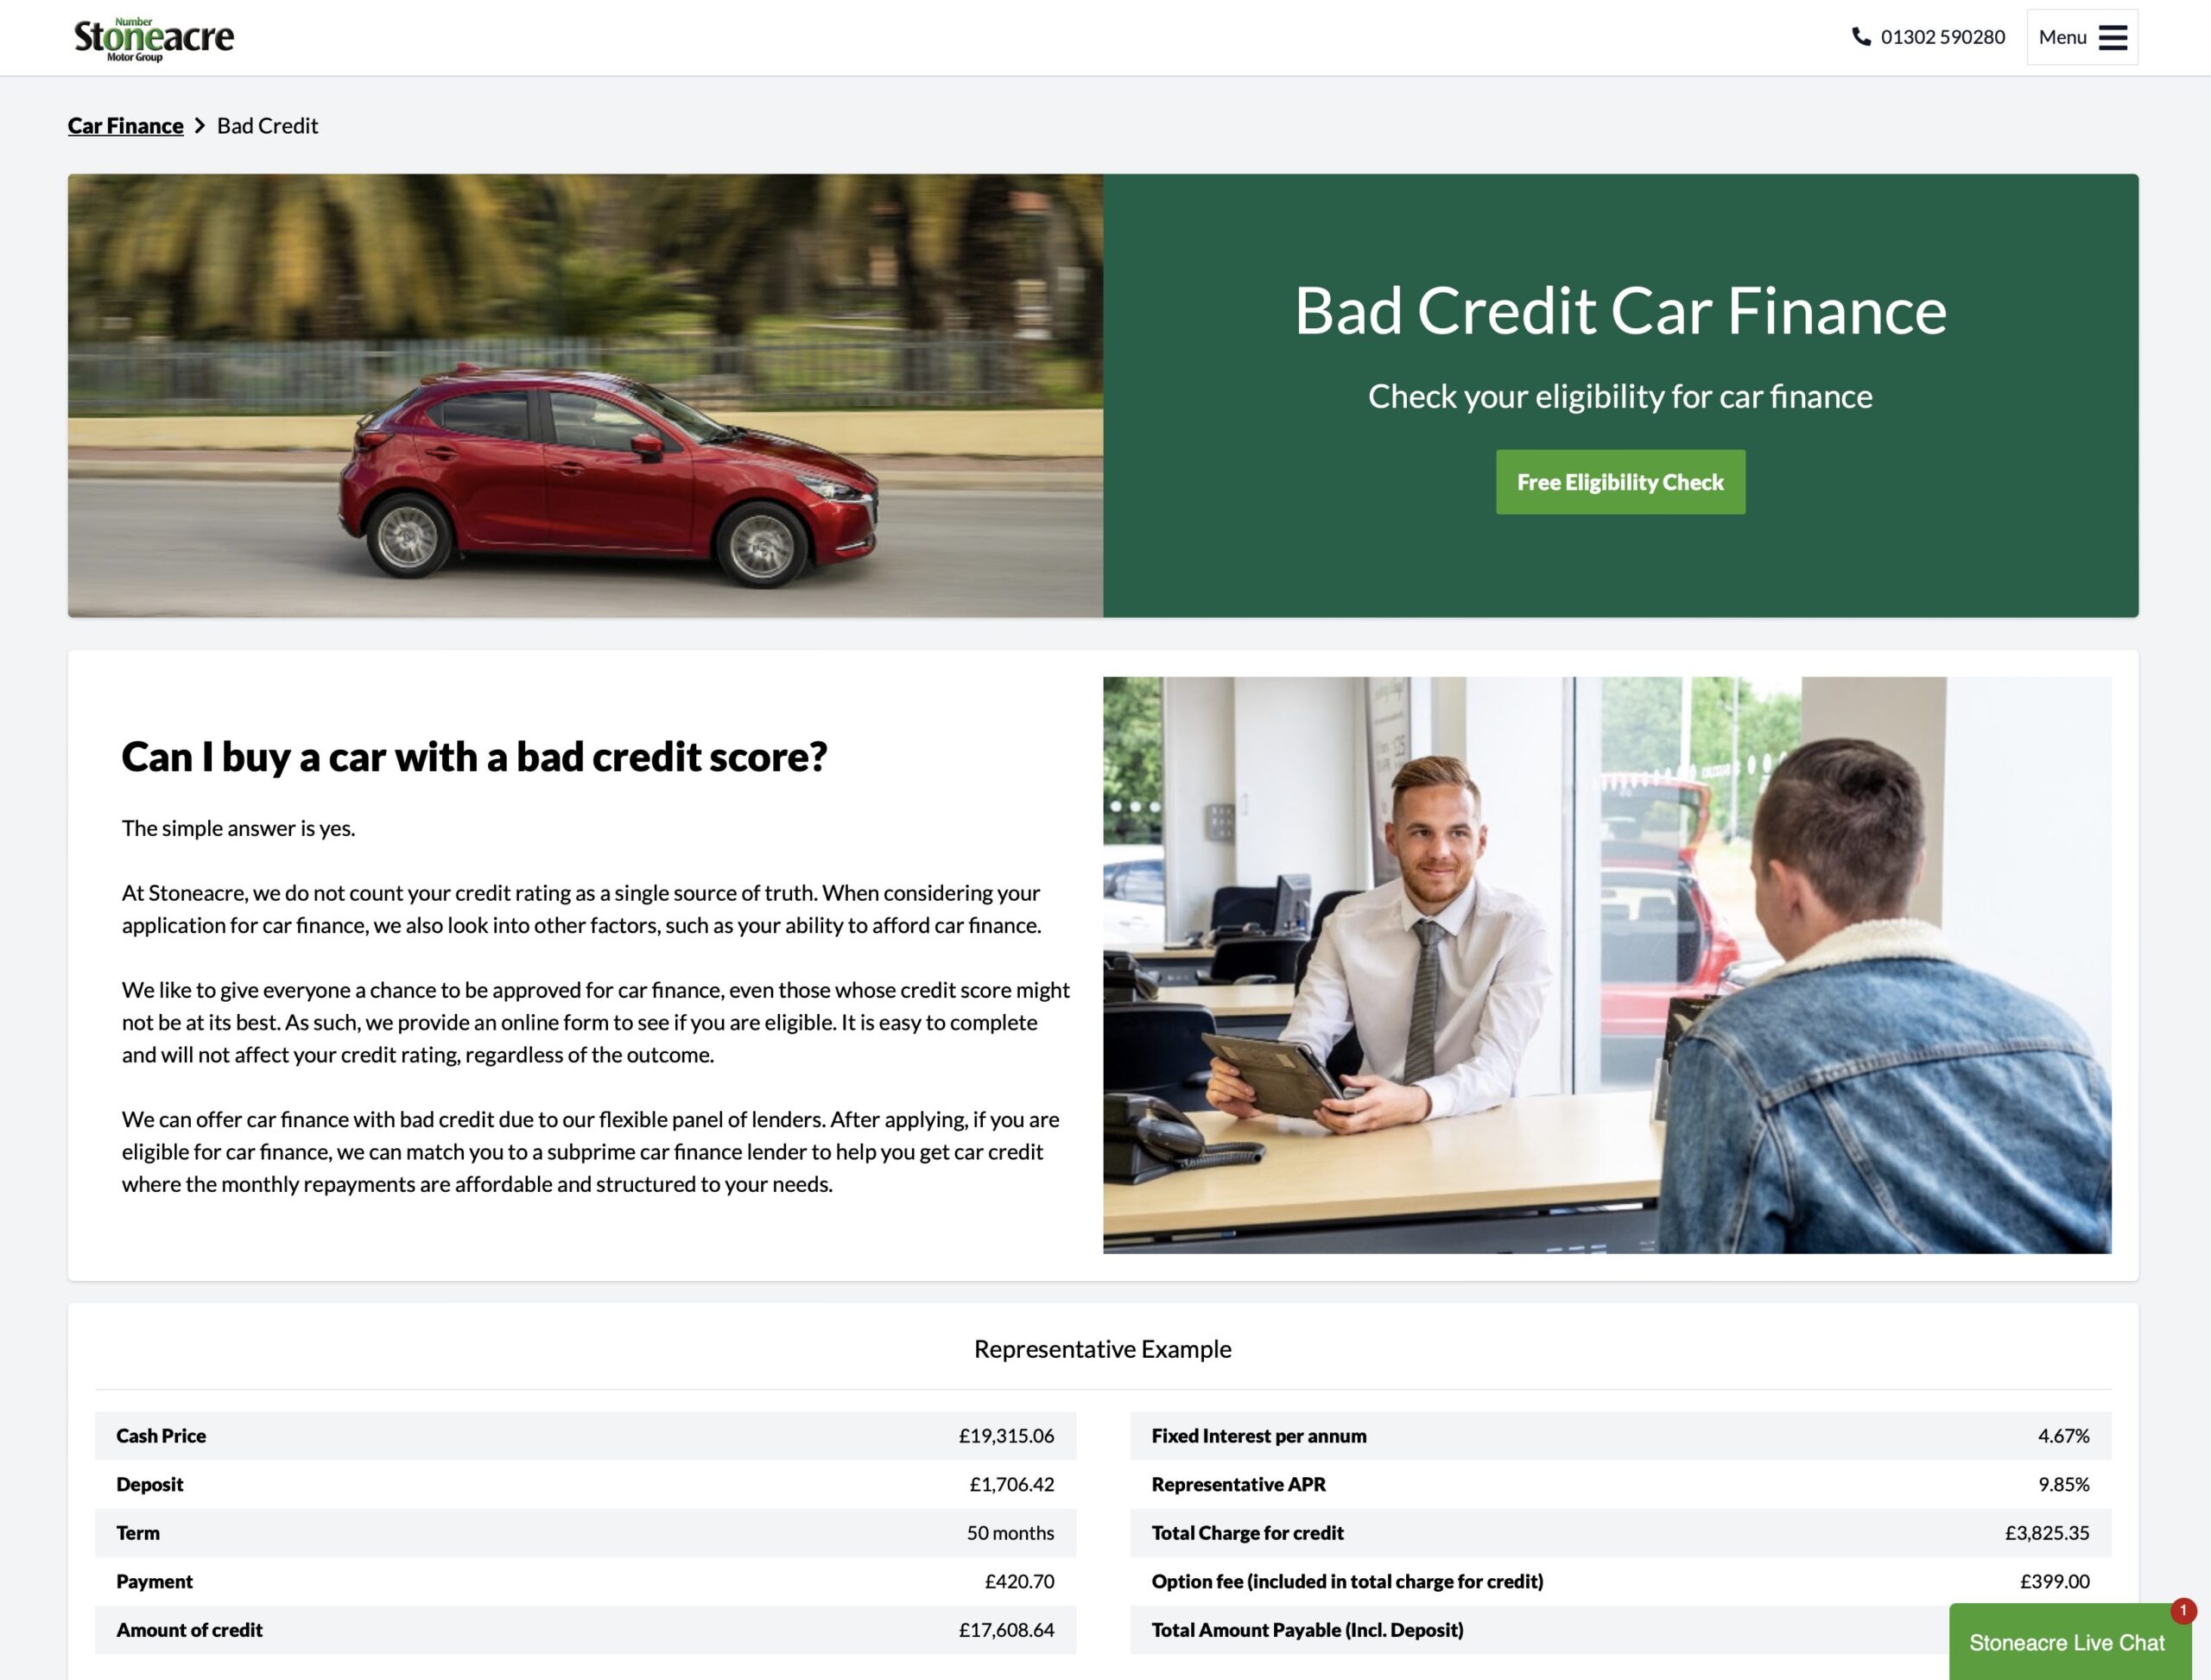 Stoneacre Motor Group Bad Credit Car Finance Page